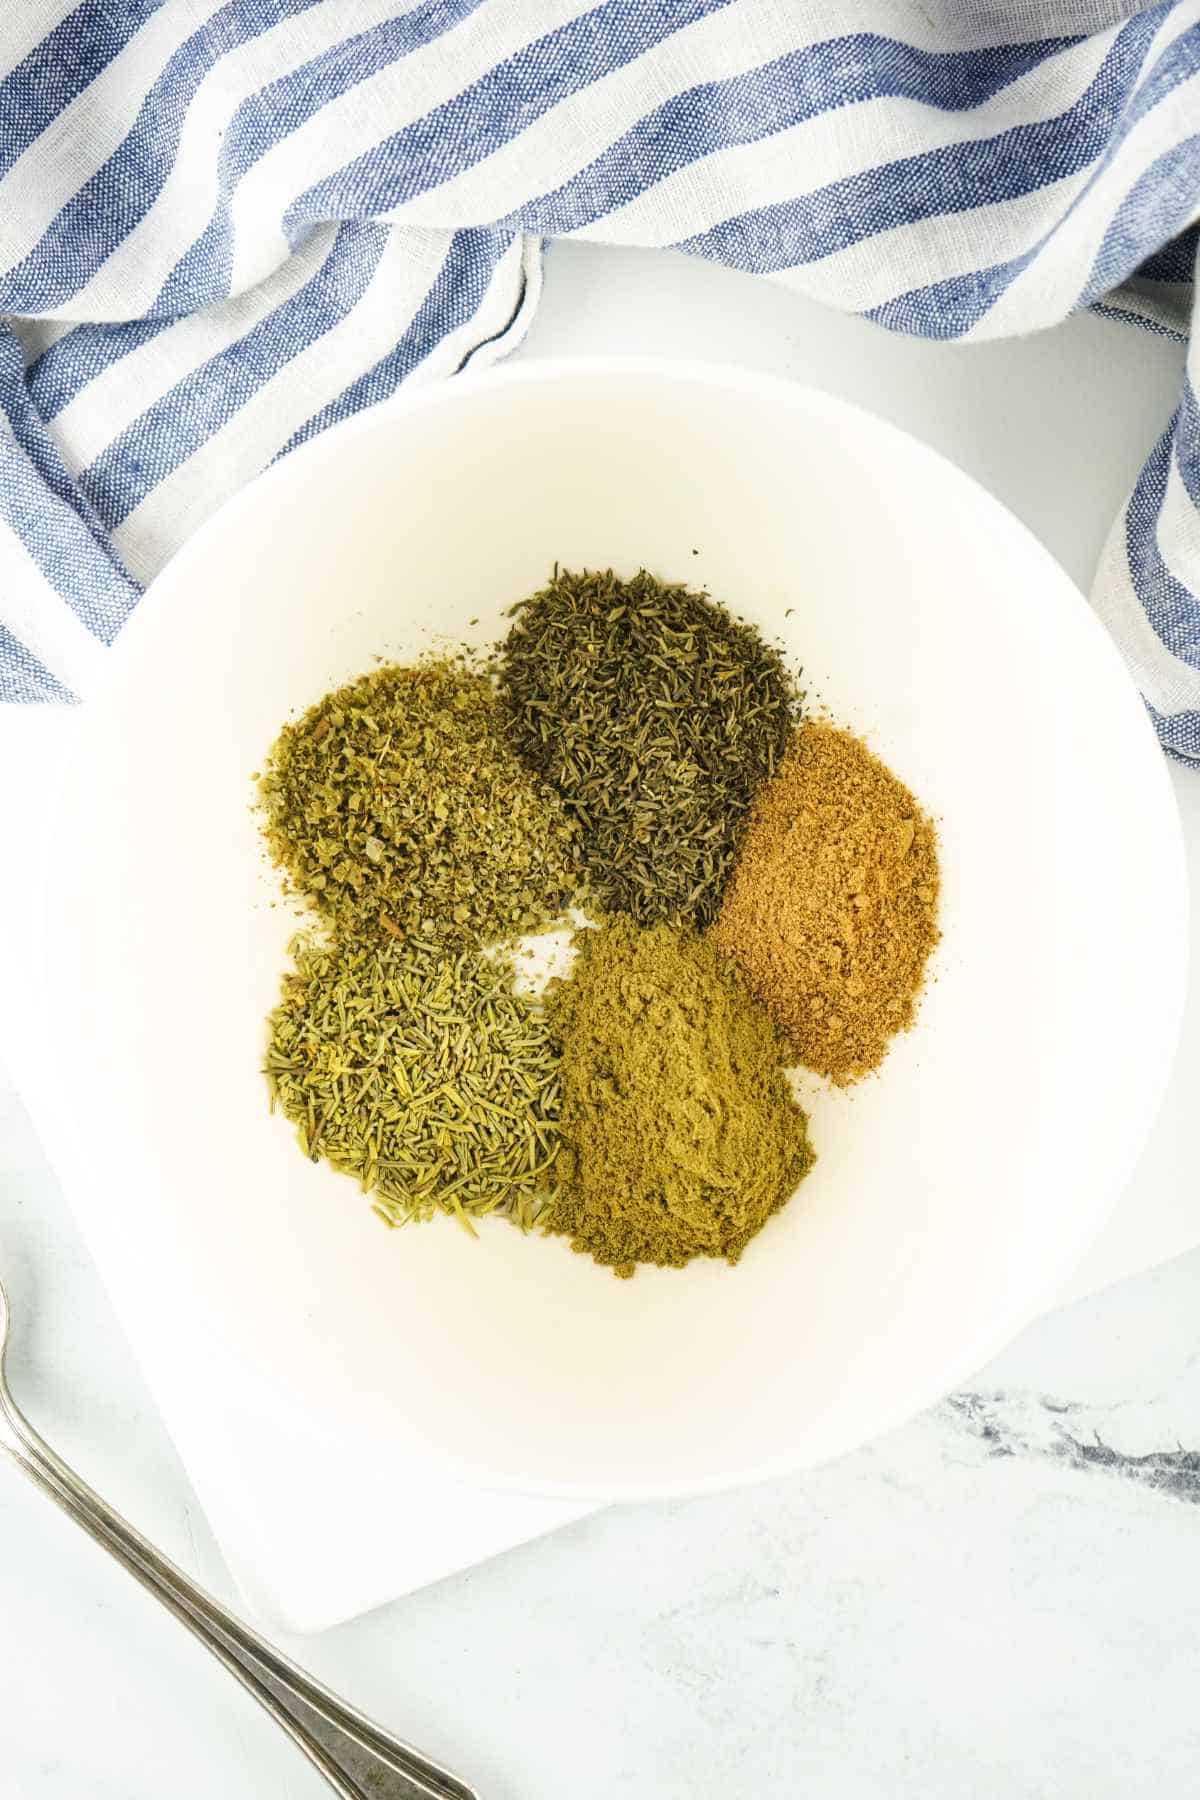 green herbs and spices in a mixing bowl on a white background.